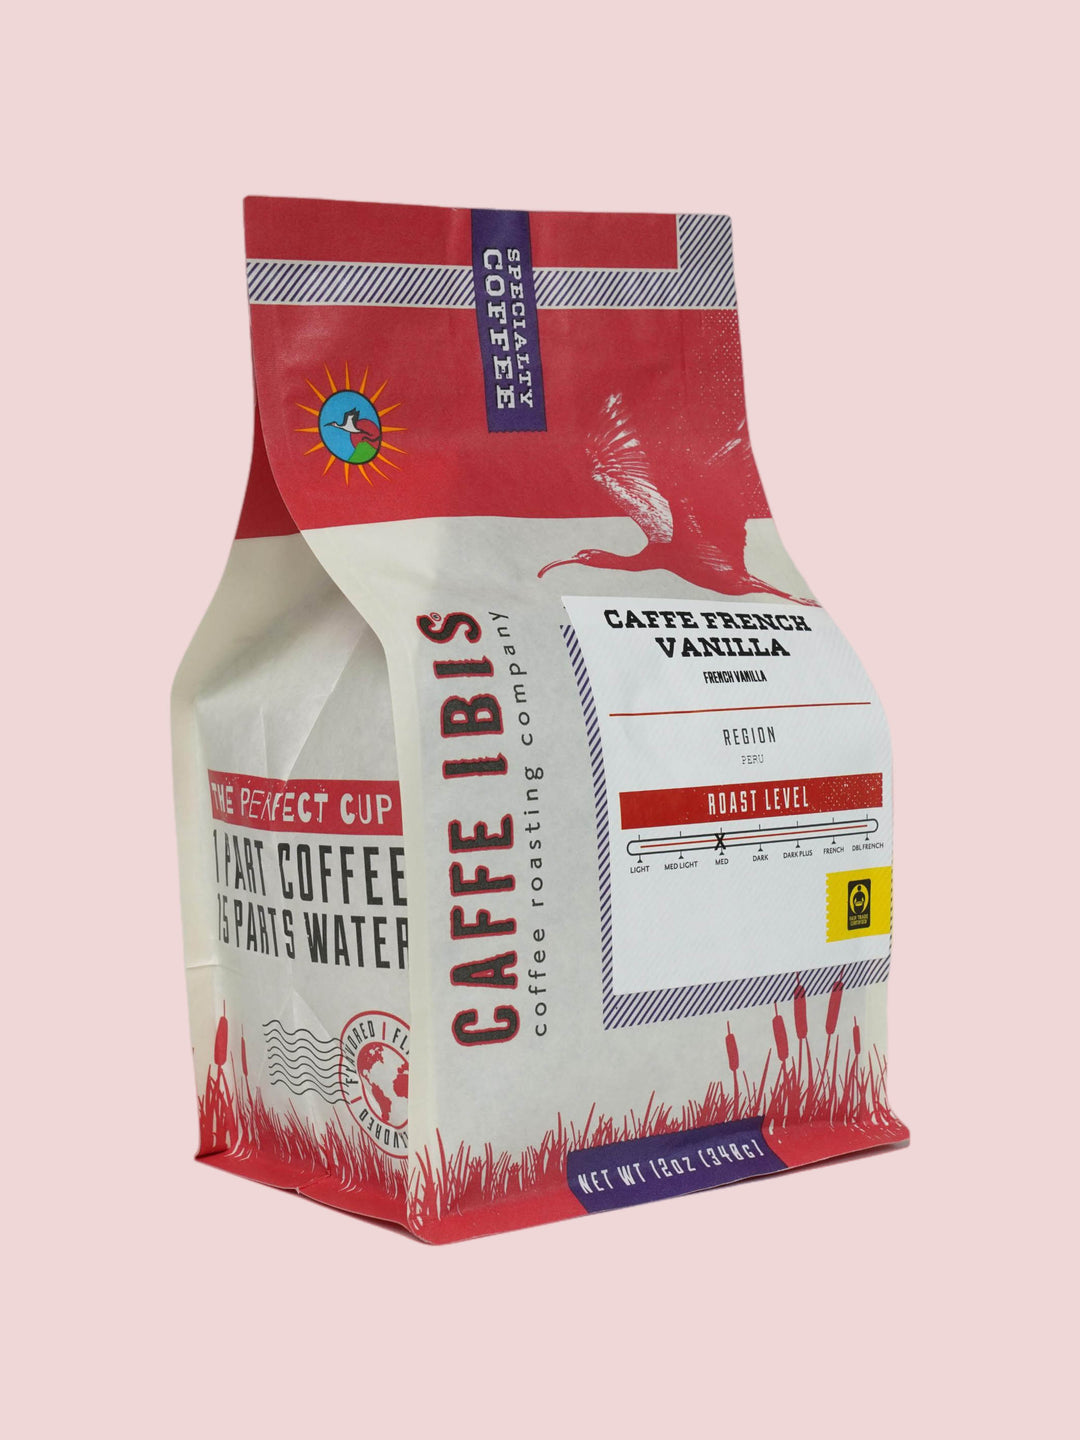 Caffe Ibis flavor Caffe French Vanilla coffee in a pink twelve ounce bag; front quarter view.